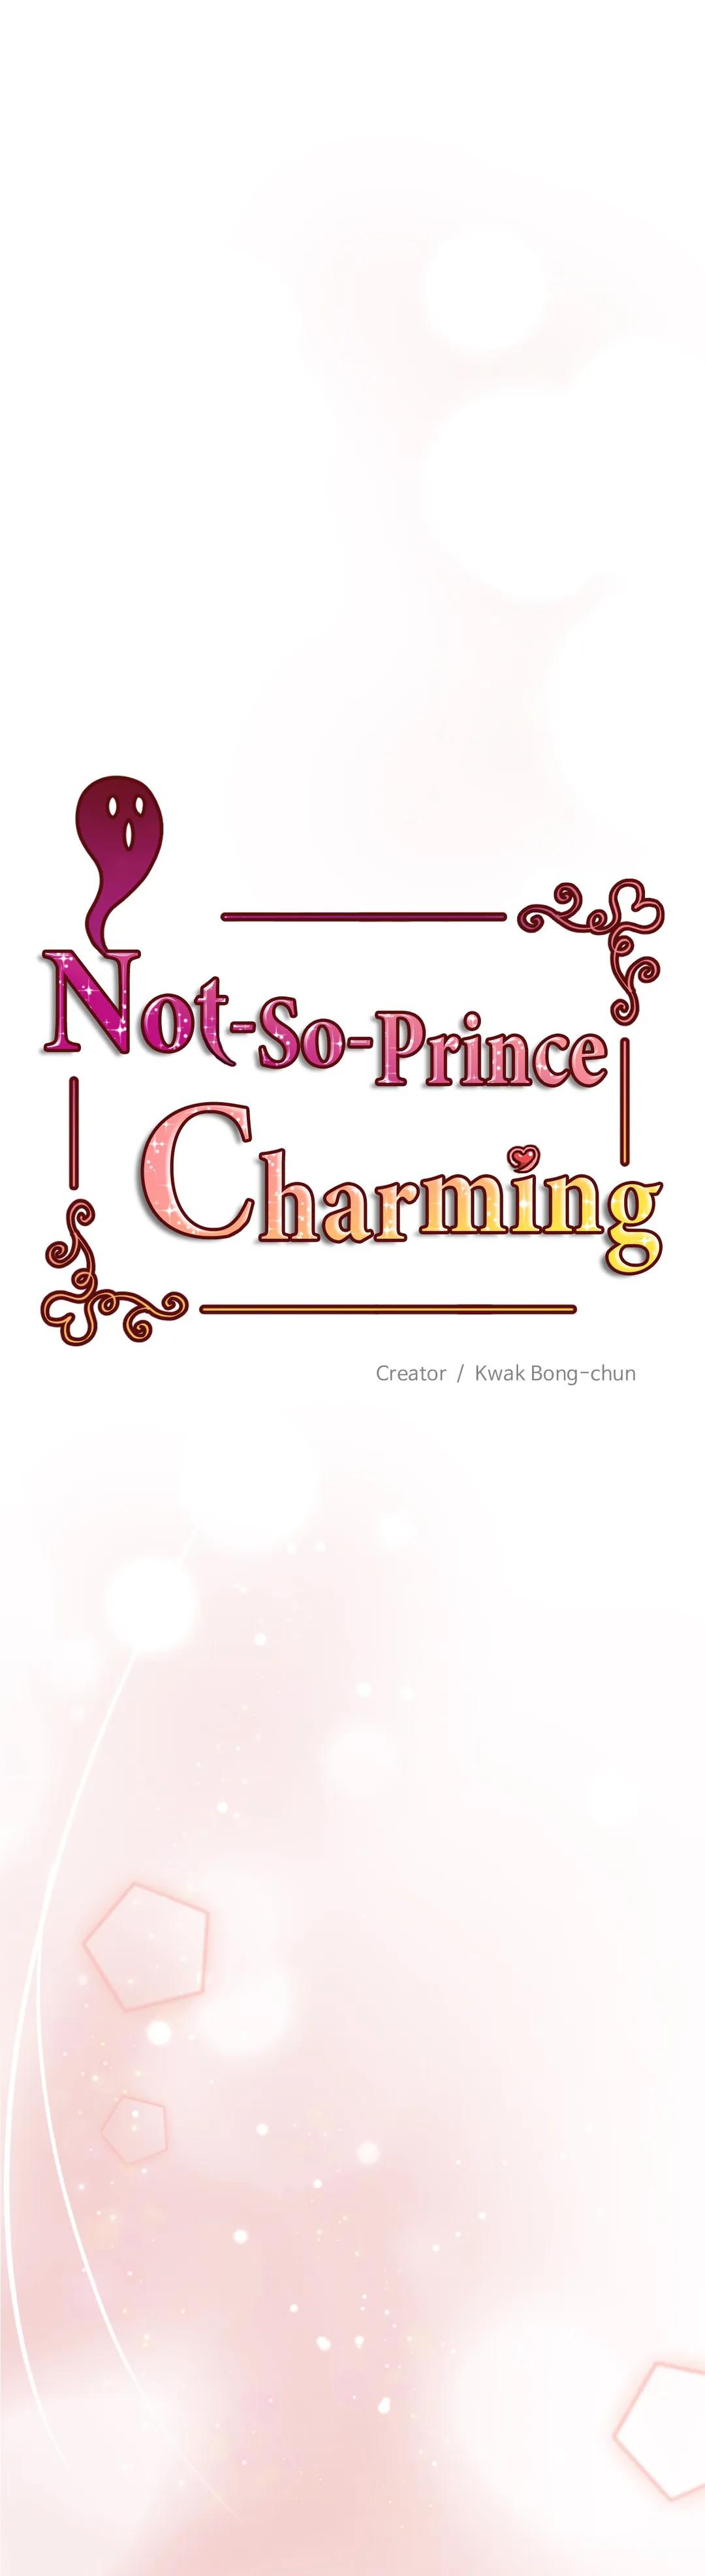 Not-So-Prince Charming - Page 3